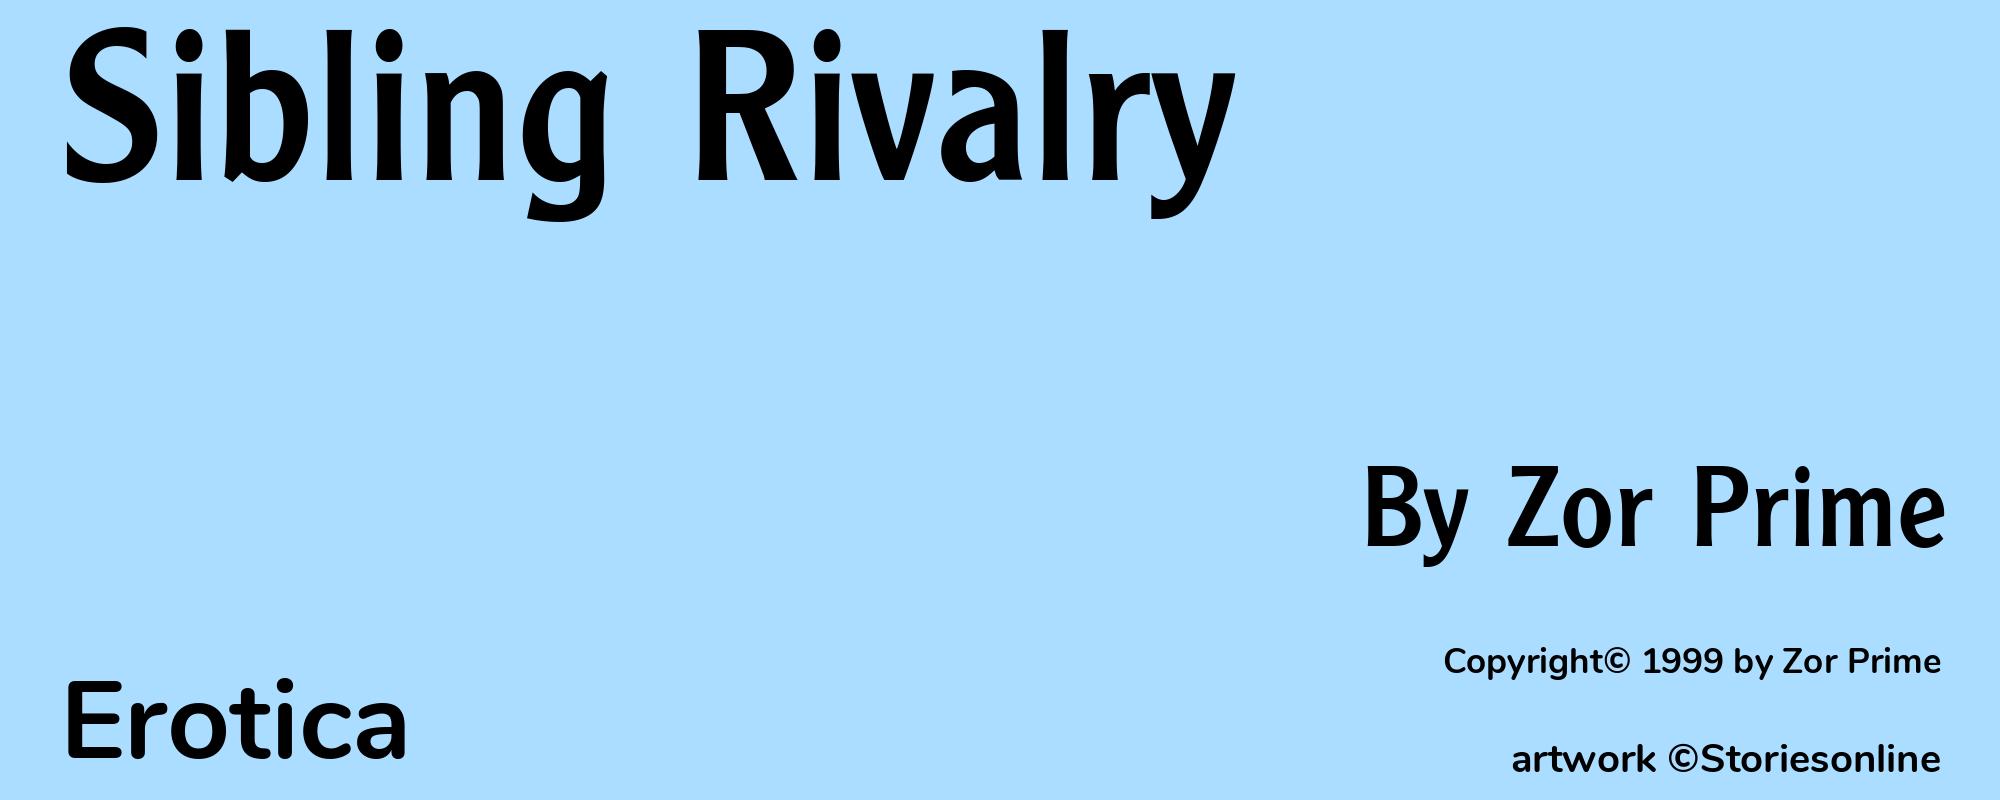 Sibling Rivalry - Cover